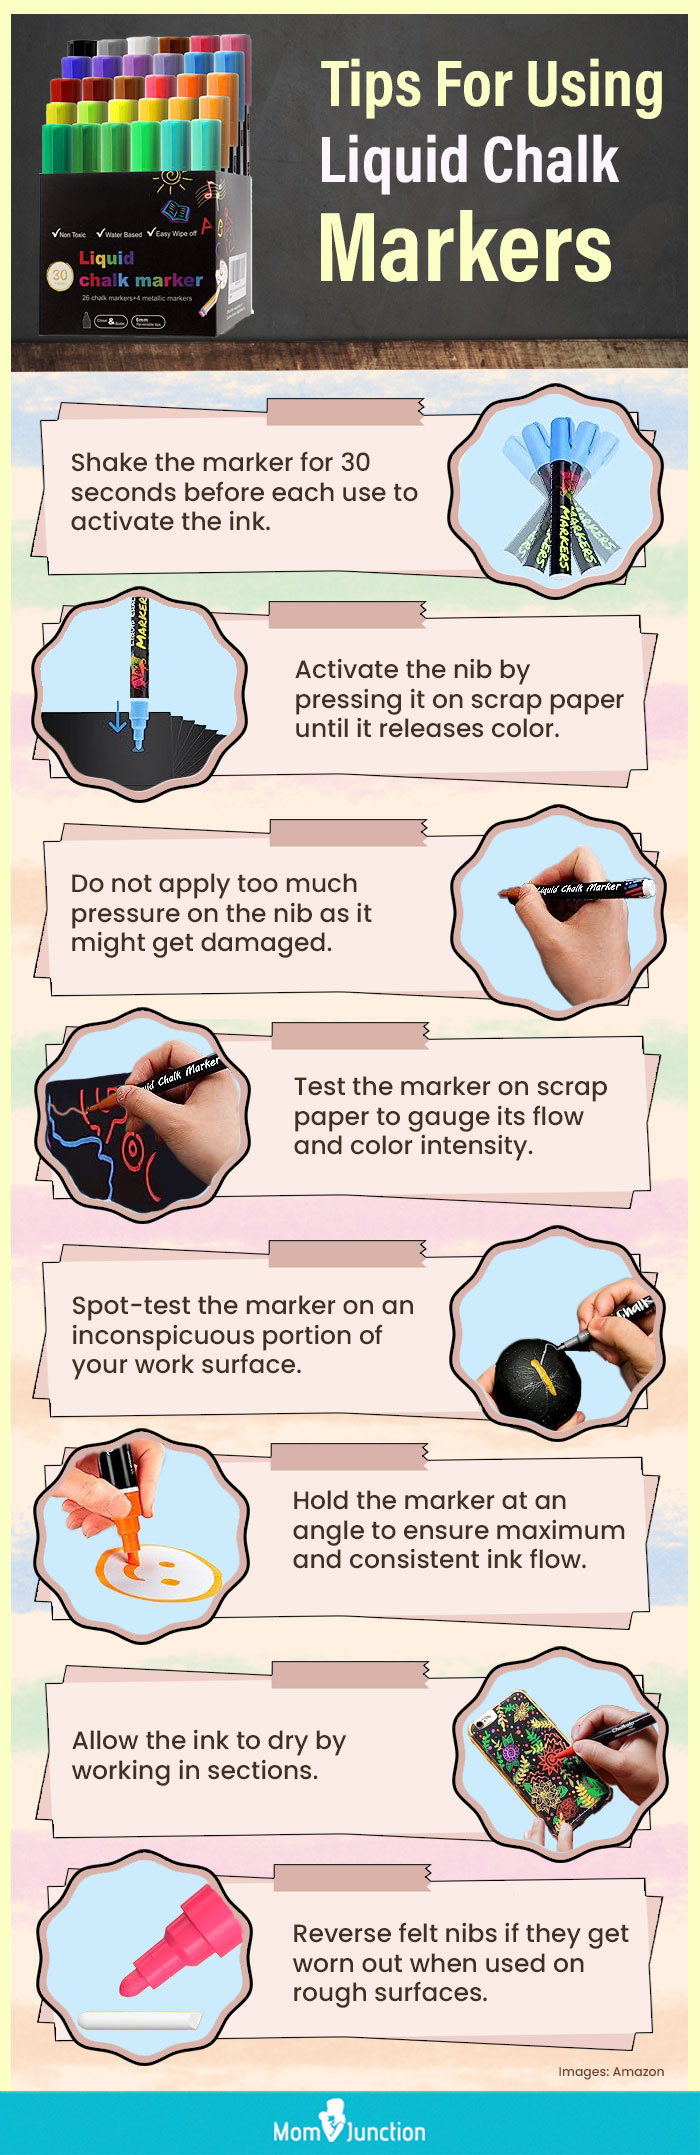 10 Different Uses for Liquid Chalk Markers (Fun & Professional)